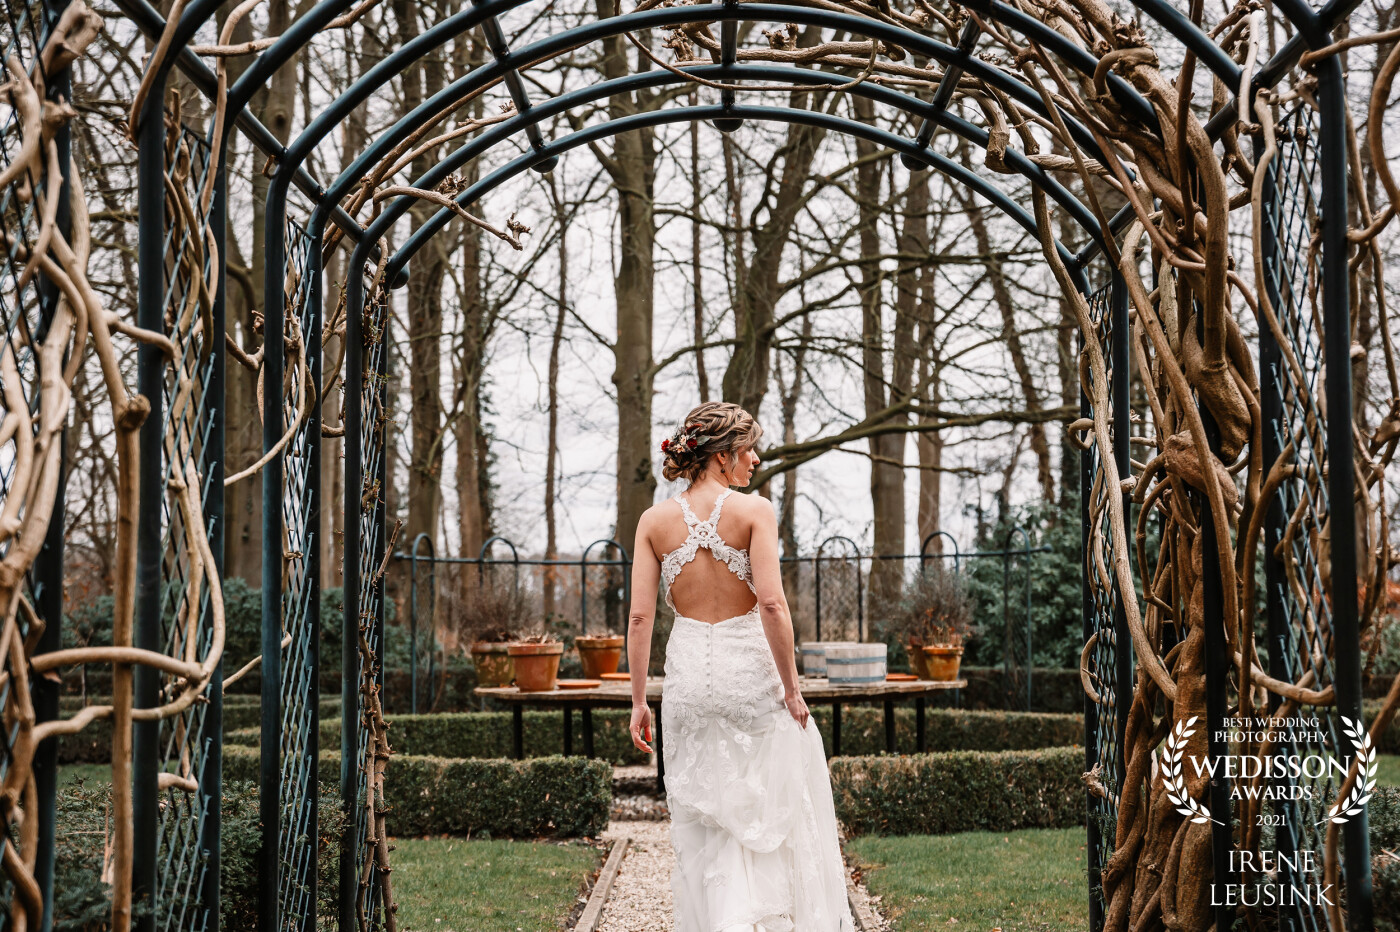 This dress is extremely beautiful when hanging down. The train is long and covered in the most beautiful lace. But the moment the bride picked the dress en train up a little bit to walk down this castle garden path I saw this picture in my head. It turned out exactly the way I hoped it would.